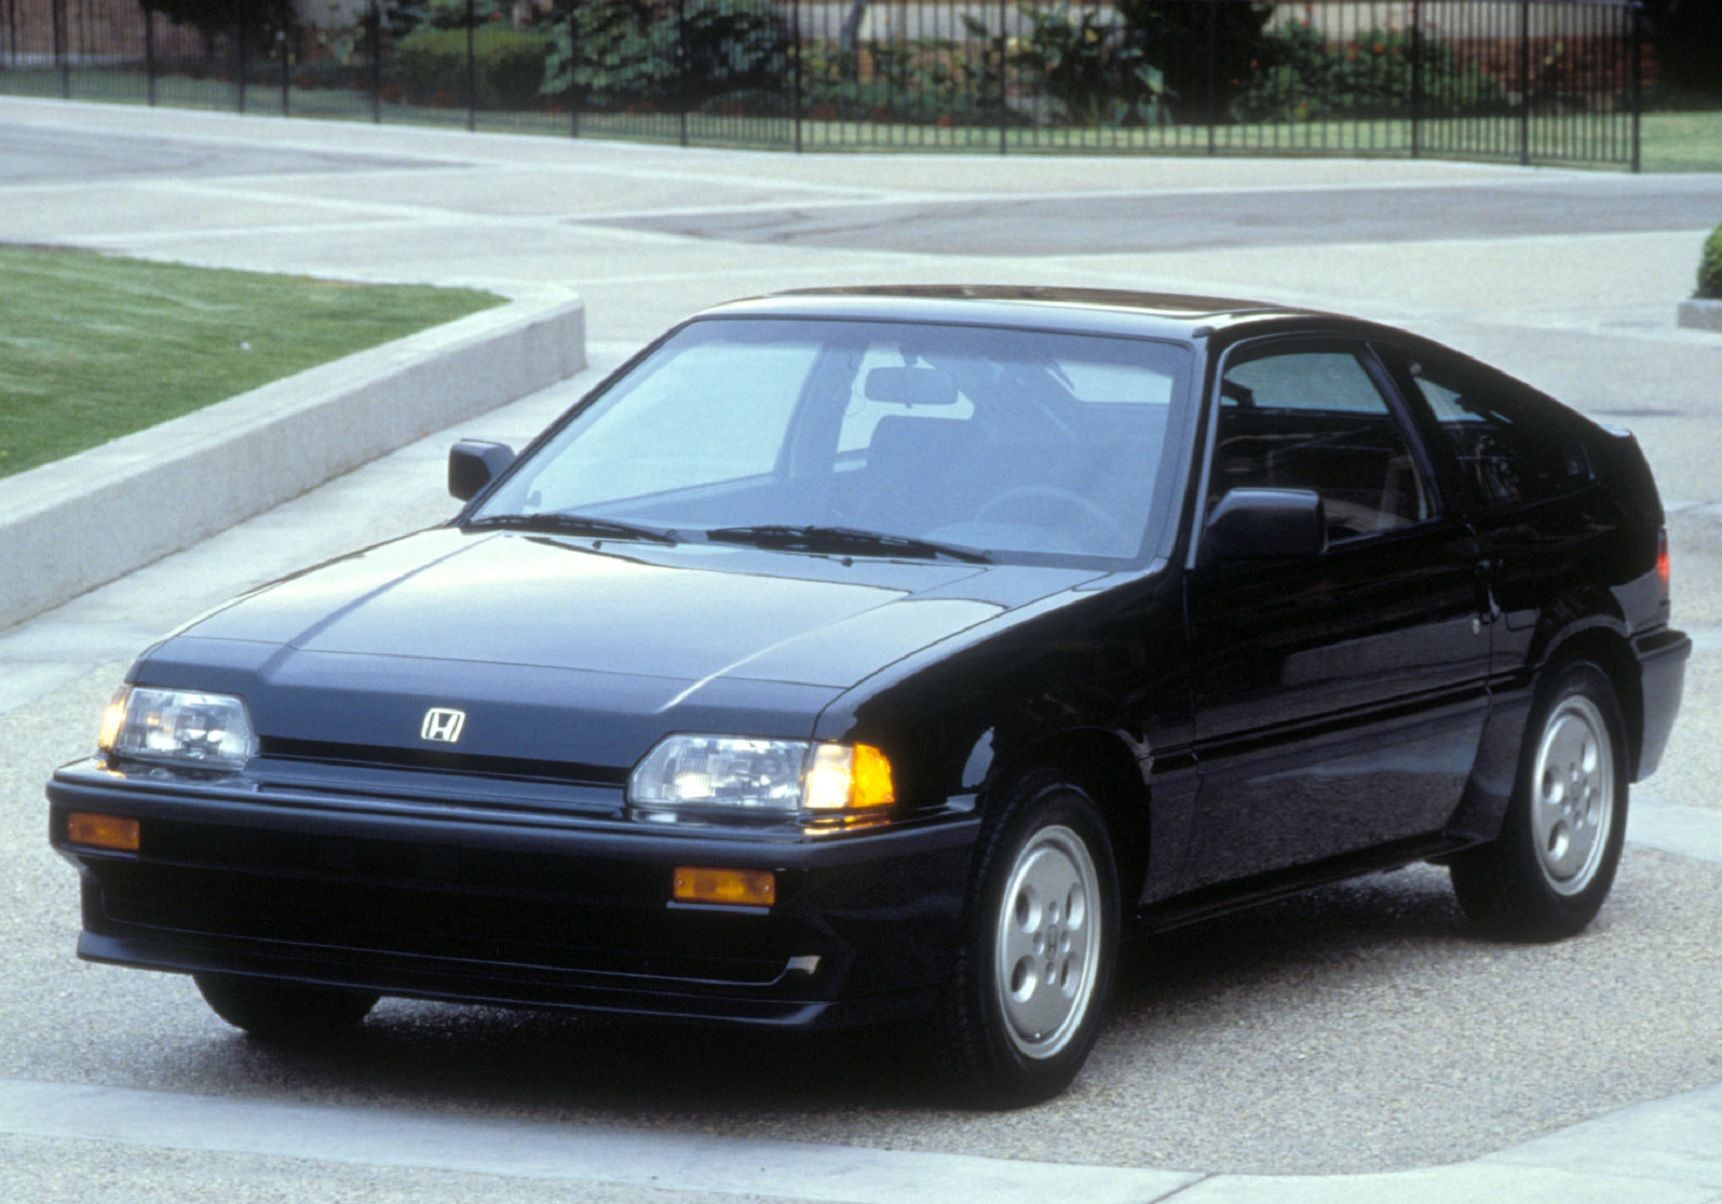 1985 Honda CRX: The perfect little sports car project.